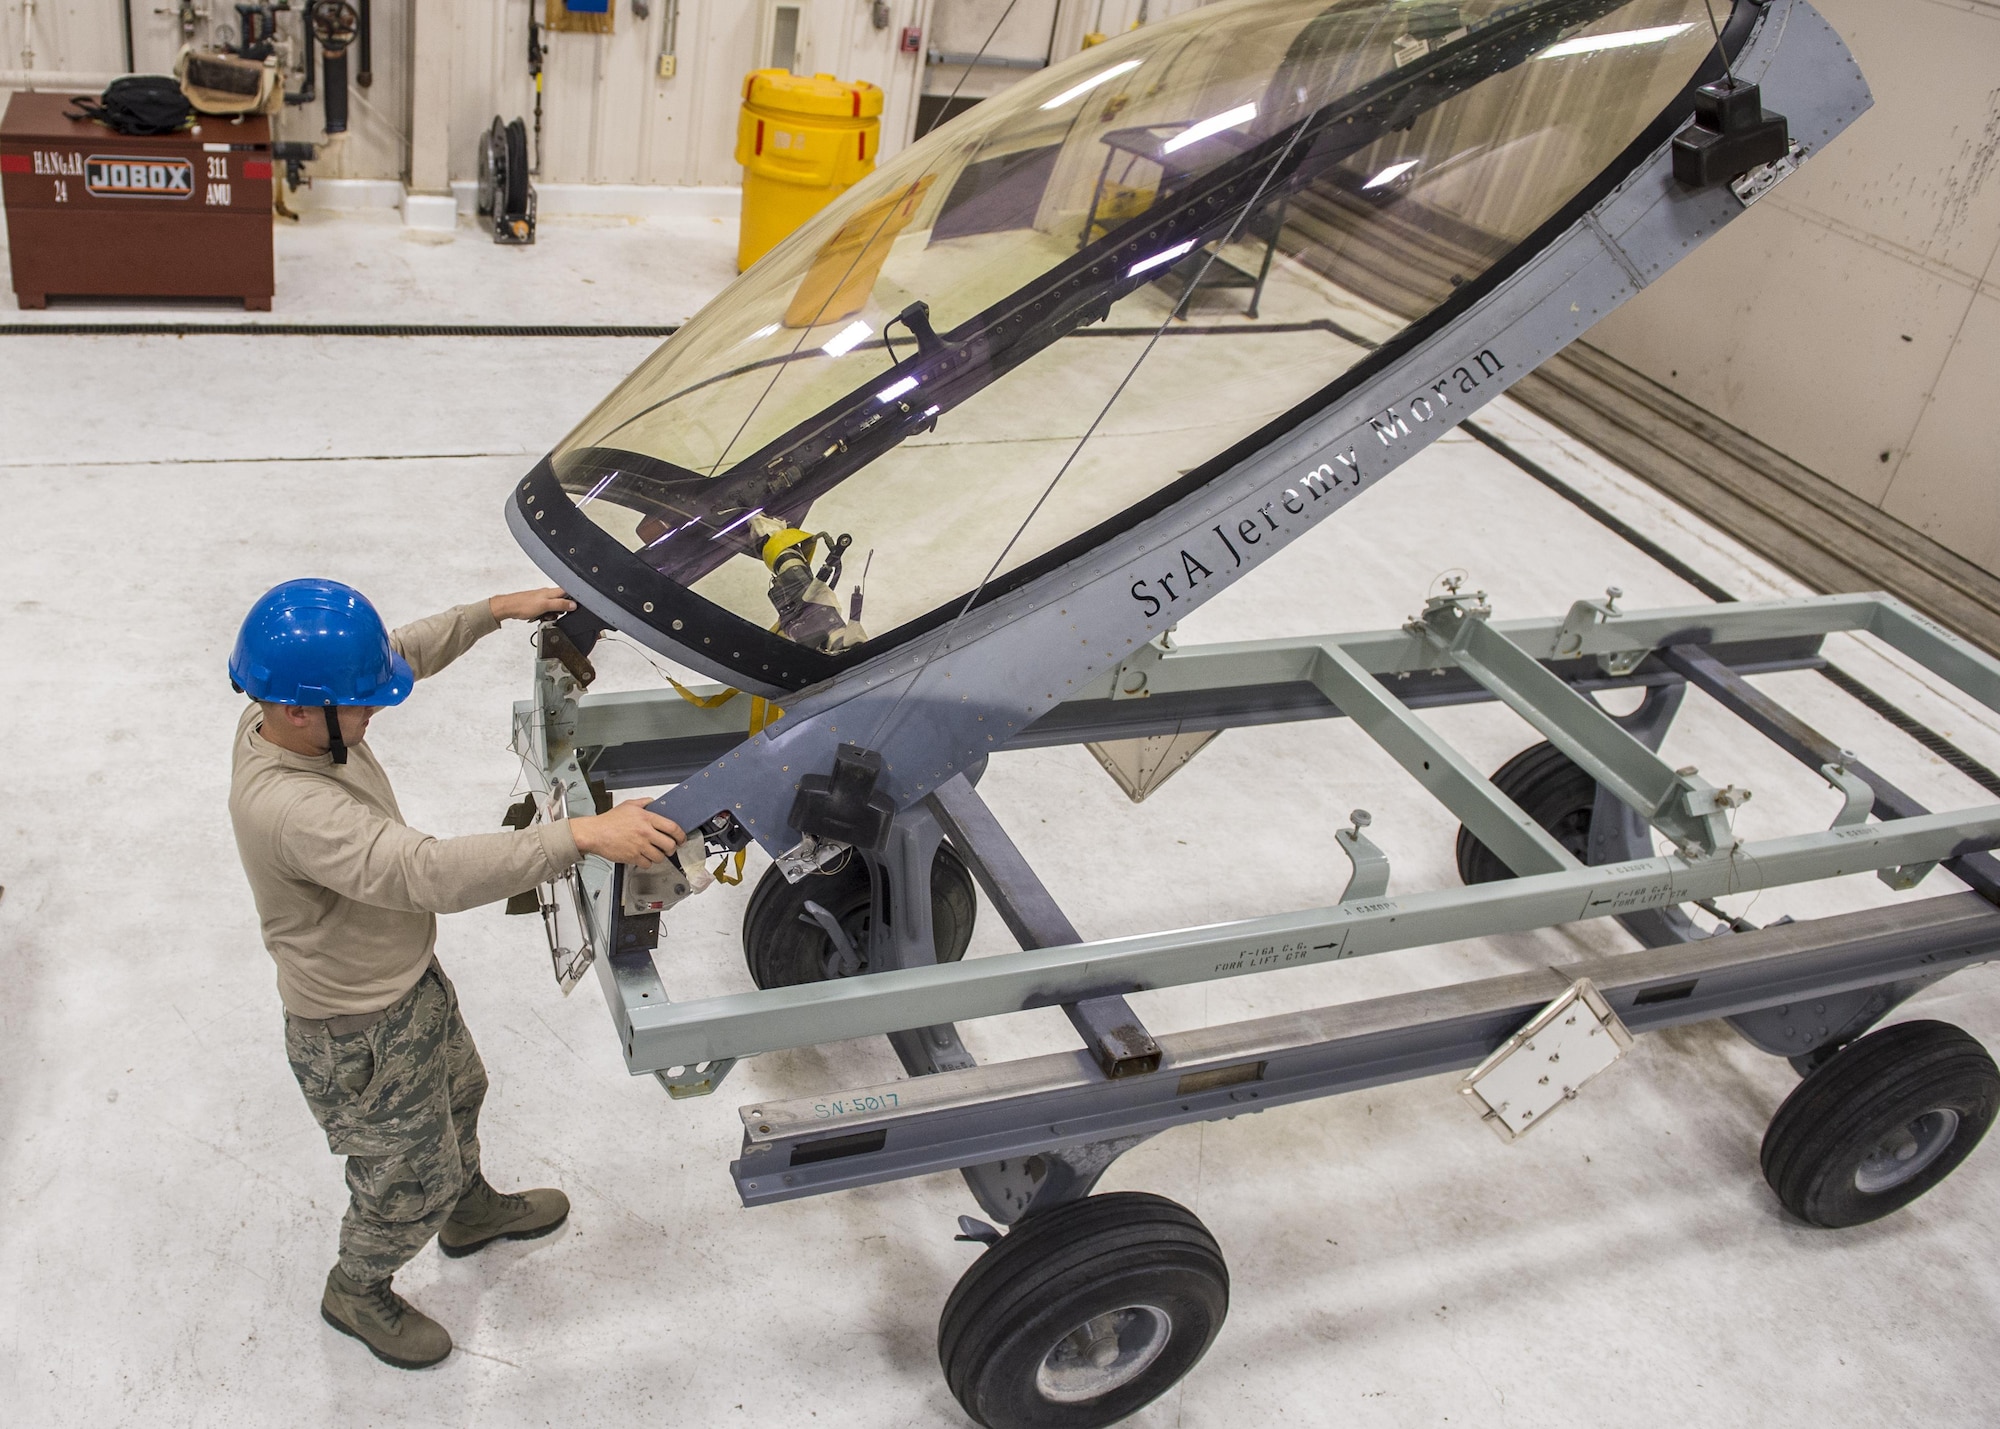 Staff Sgt. Mitchell Lawhorn, a 54th Maintenance Squadron egress systems craftsman, removes the canopy of an F-16 Fighting Falcon on March 13, 2017 at Holloman Air Force Base, N.M. Egress specialists work hand-in-hand with Aircrew Flight Equipment to ensure pilots have the necessary equipment in case of an emergency. (U.S. Air Force photo by Senior Airman Emily Kenney)